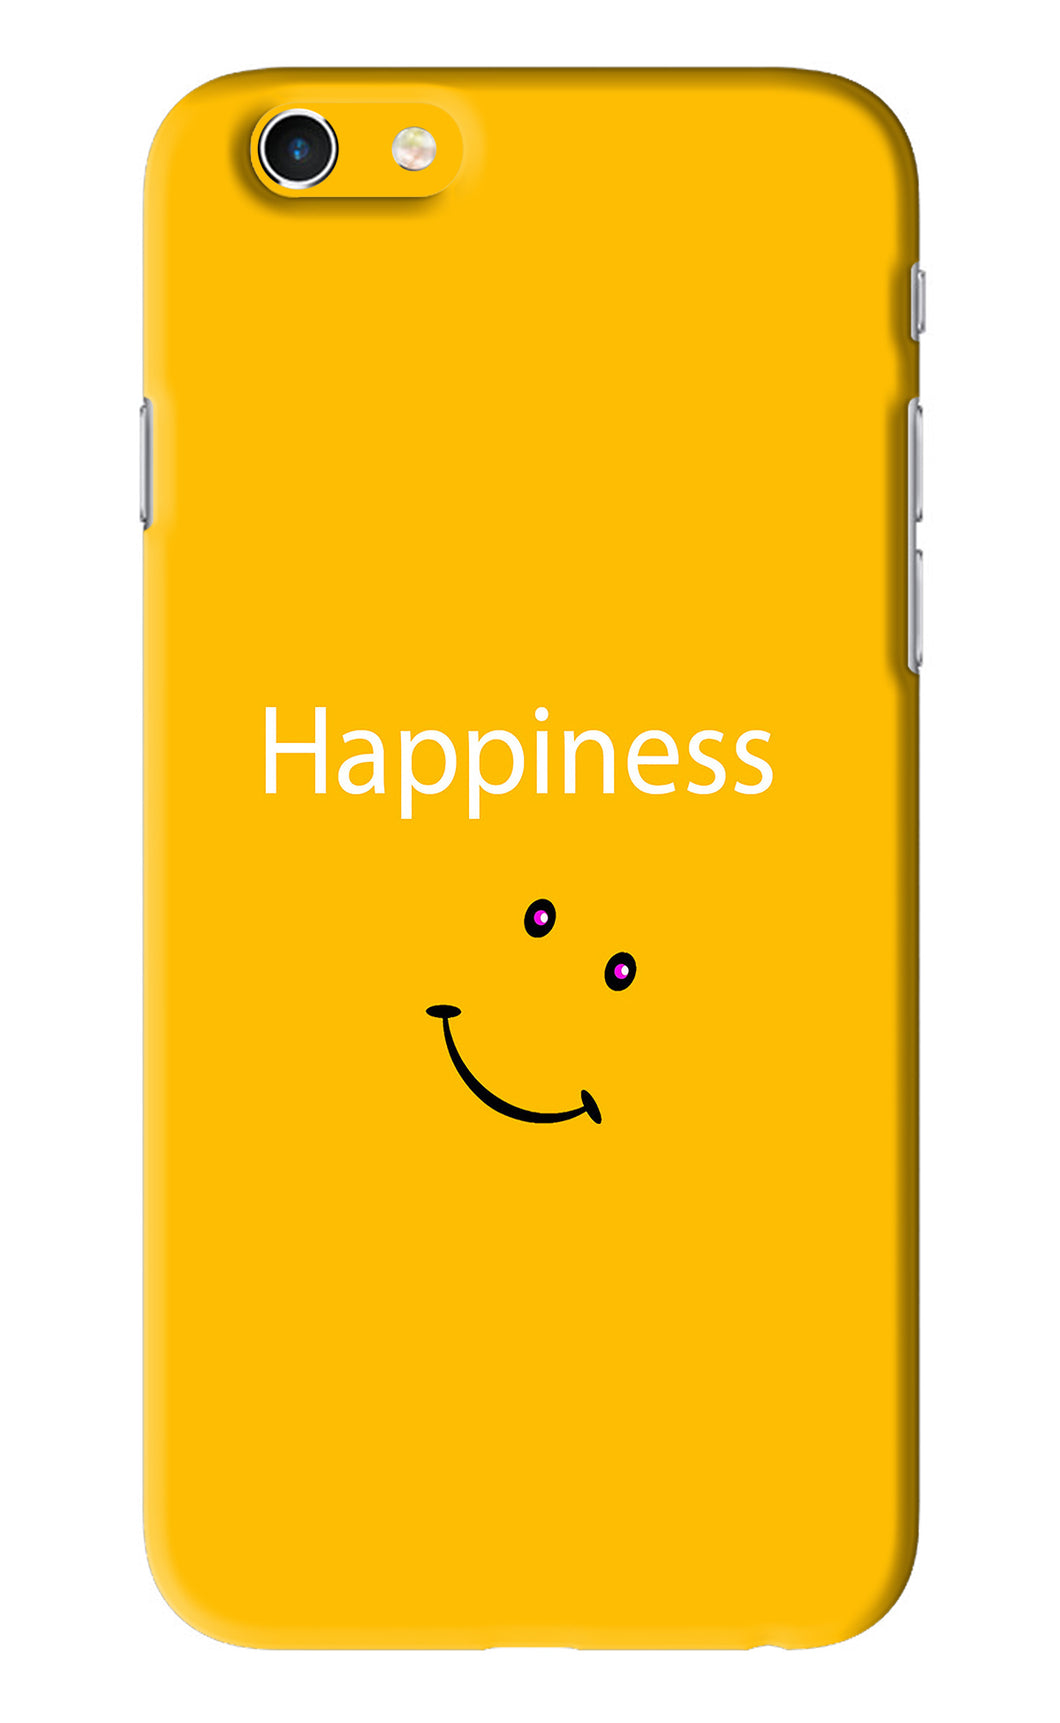 Happiness With Smiley iPhone 6 Back Skin Wrap